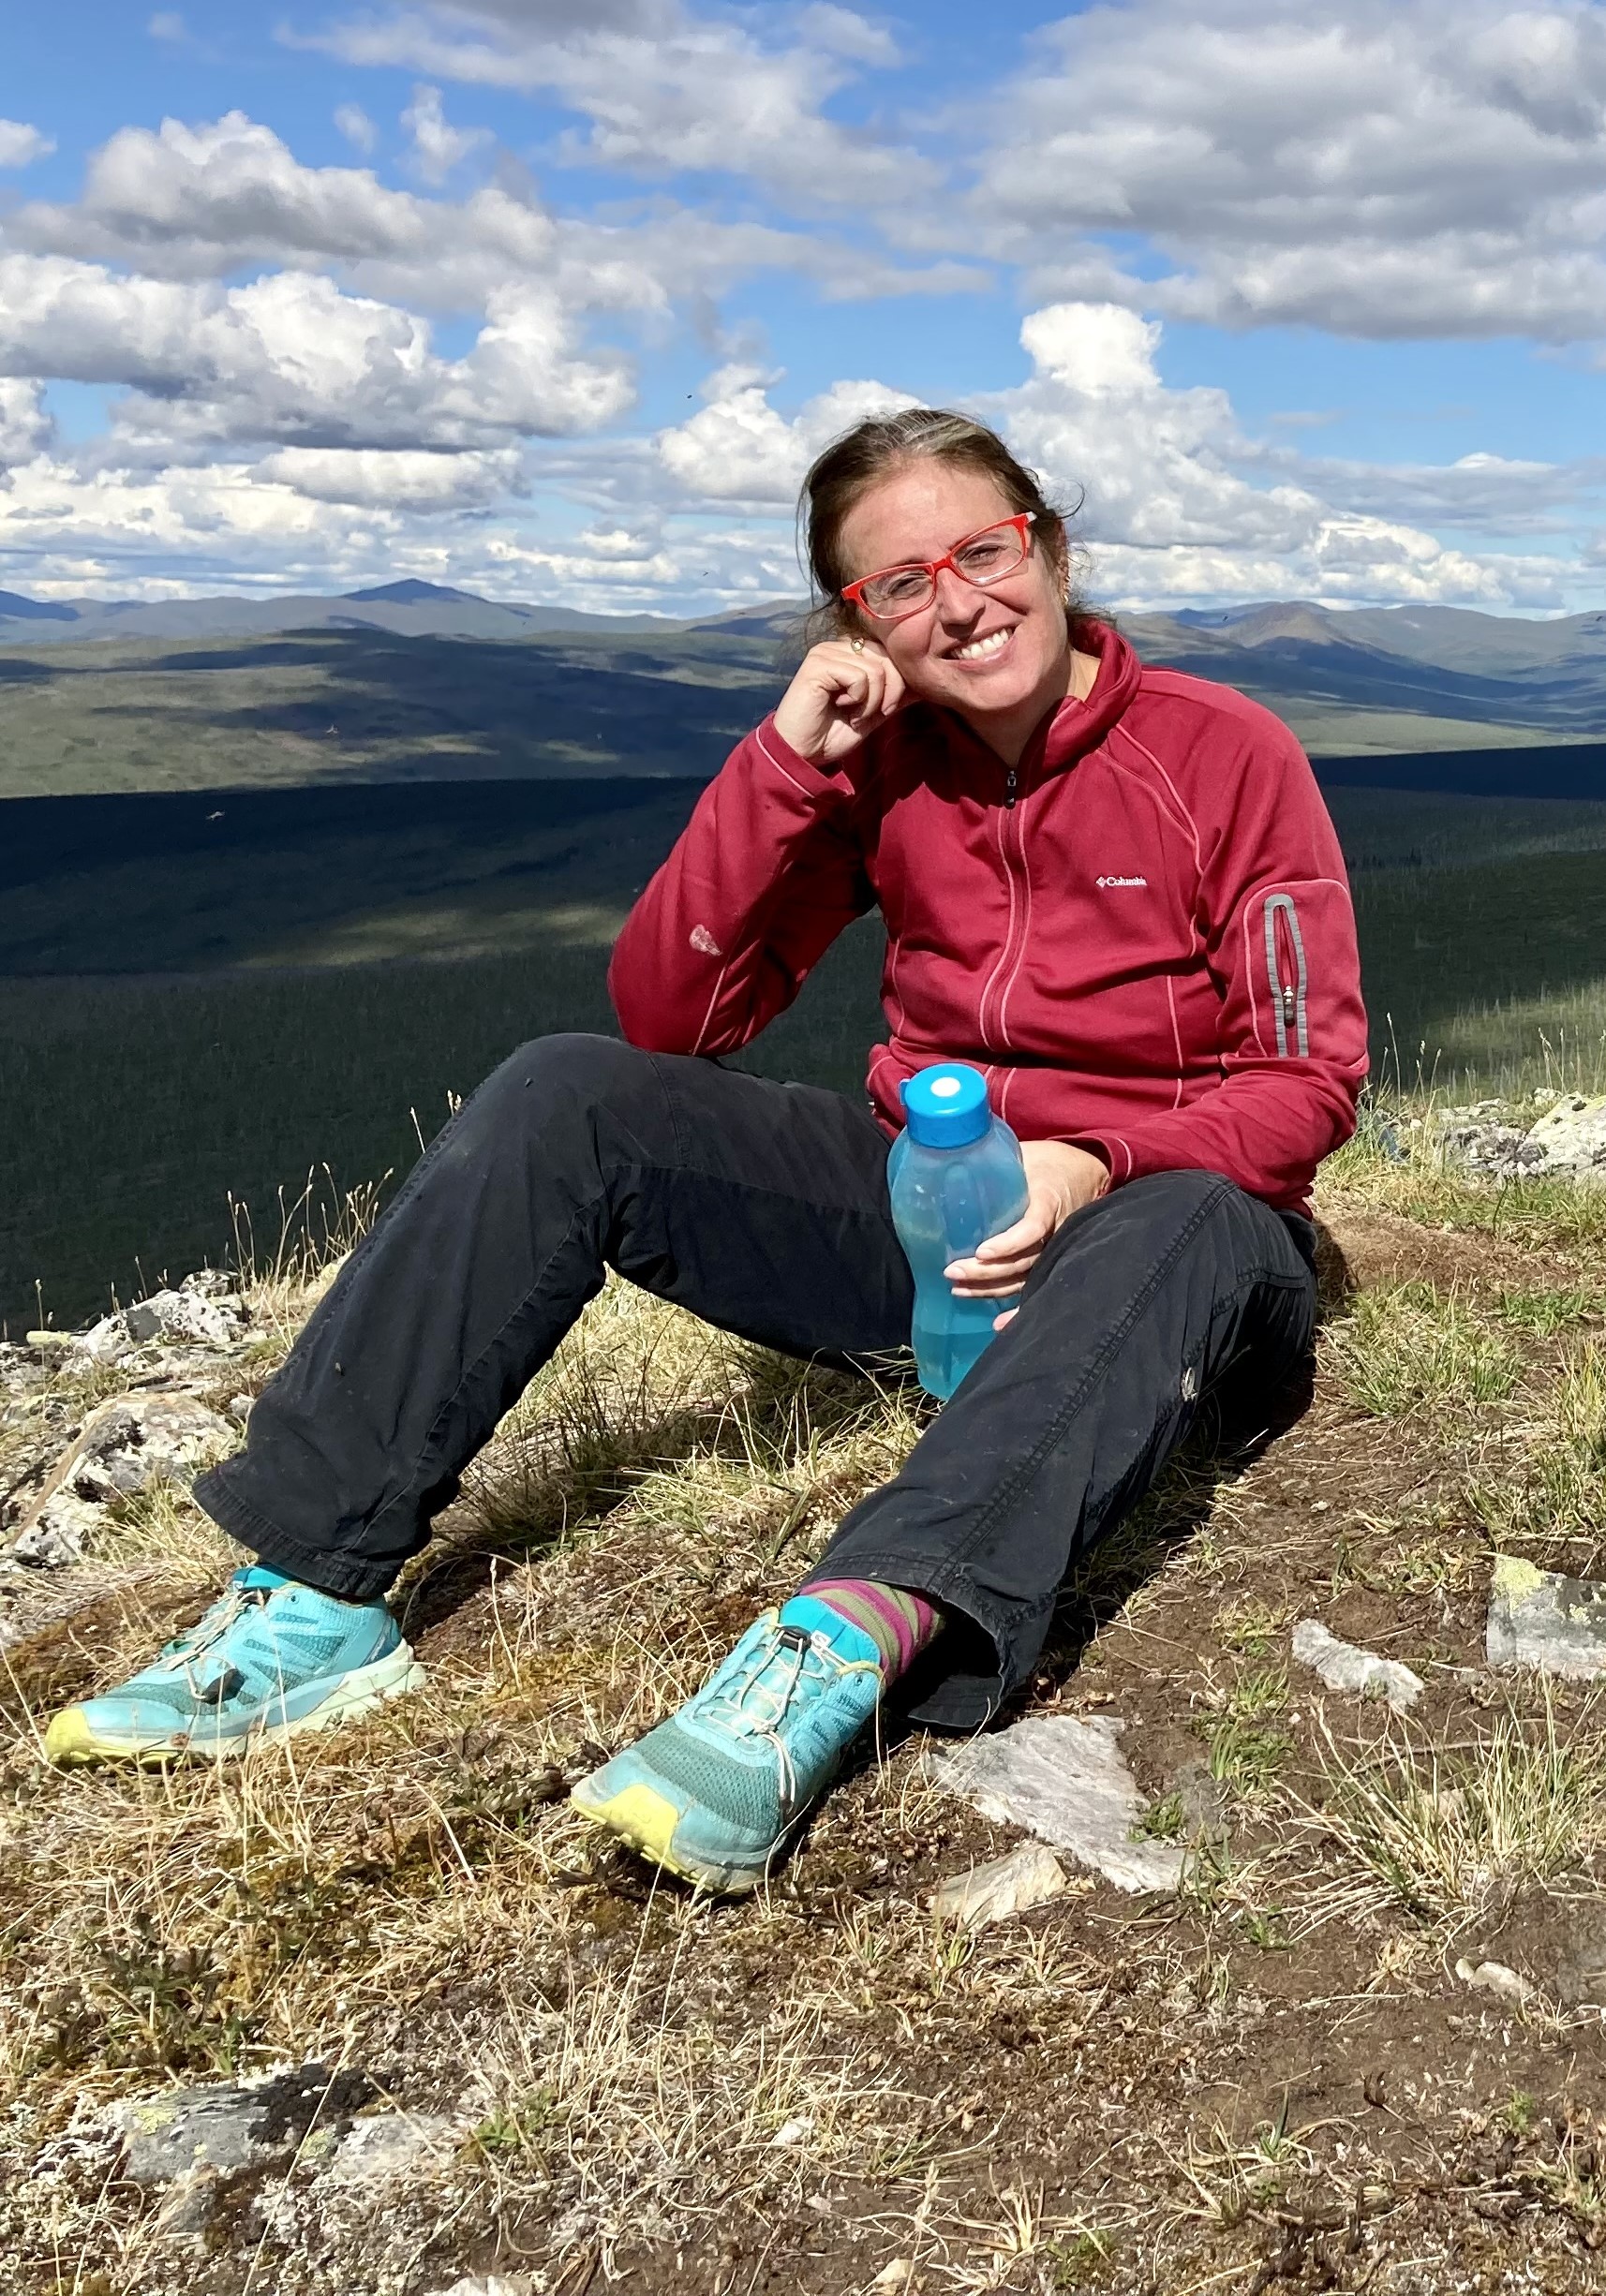 Nicole Misarti takes in the scenic beauty of Fairbanks during a summer hike.